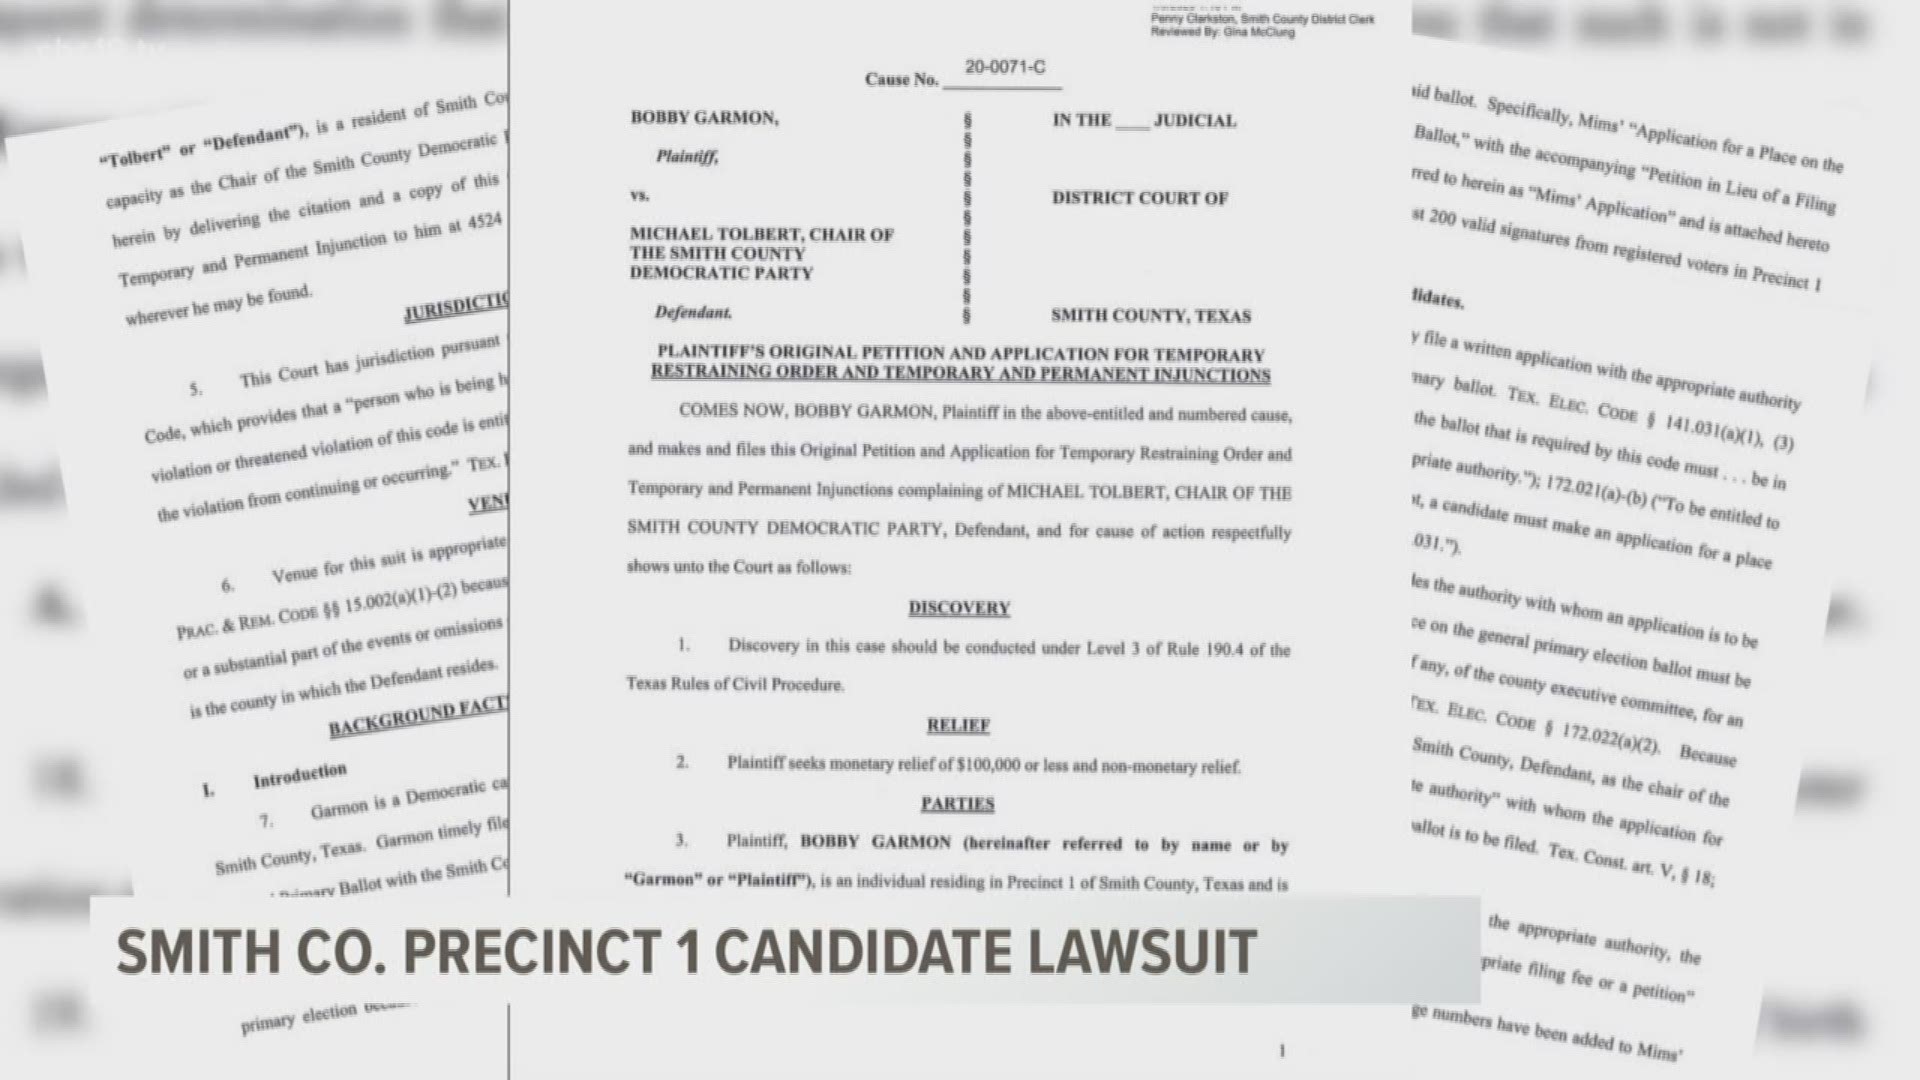 A lawsuit has been filed claiming one of the candidates running for Smith County Precinct 1 Constable failed to meet legal requirements to be on the ballot.